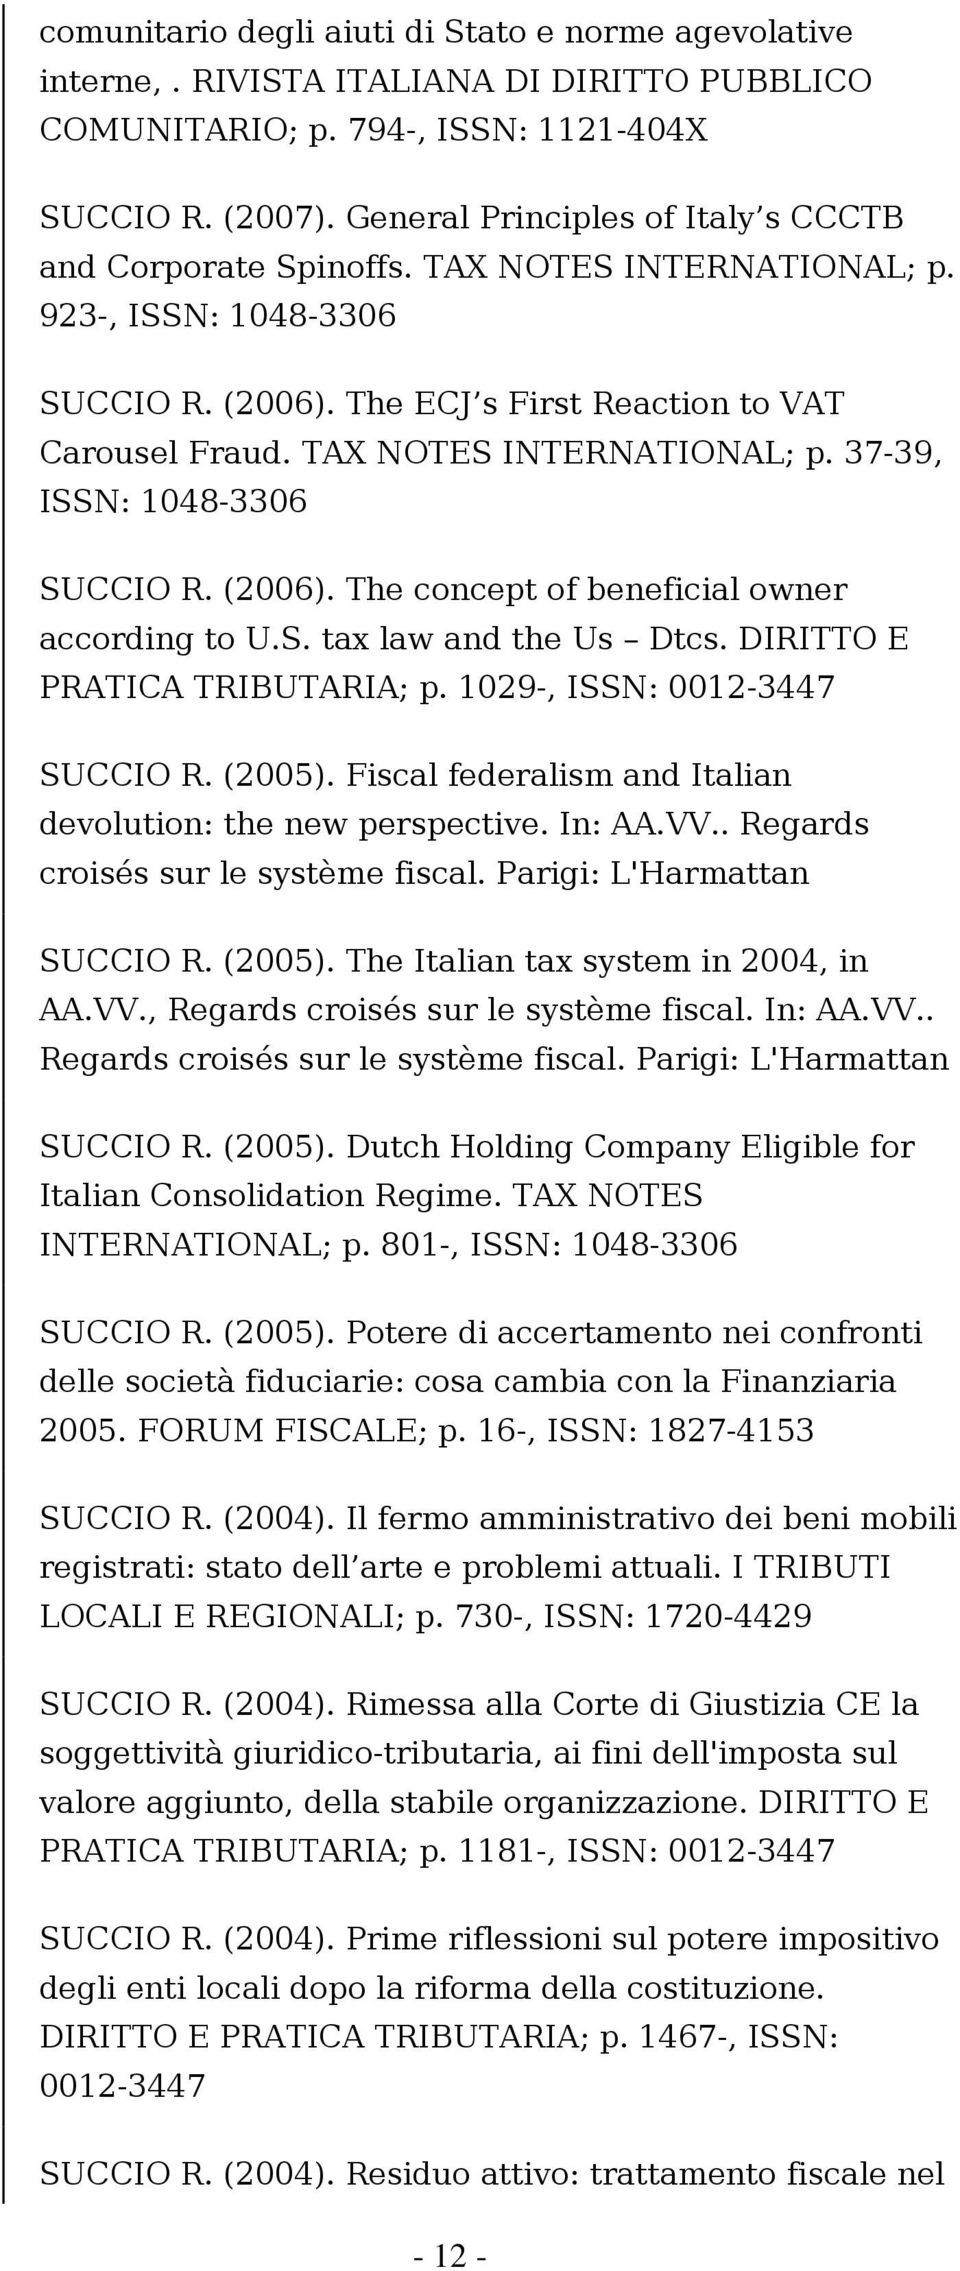 TAX NOTES INTERNATIONAL; p. 37-39, ISSN: 1048-3306 SUCCIO R. (2006). The concept of beneficial owner according to U.S. tax law and the Us Dtcs. DIRITTO E PRATICA TRIBUTARIA; p. 1029-, ISSN: SUCCIO R.